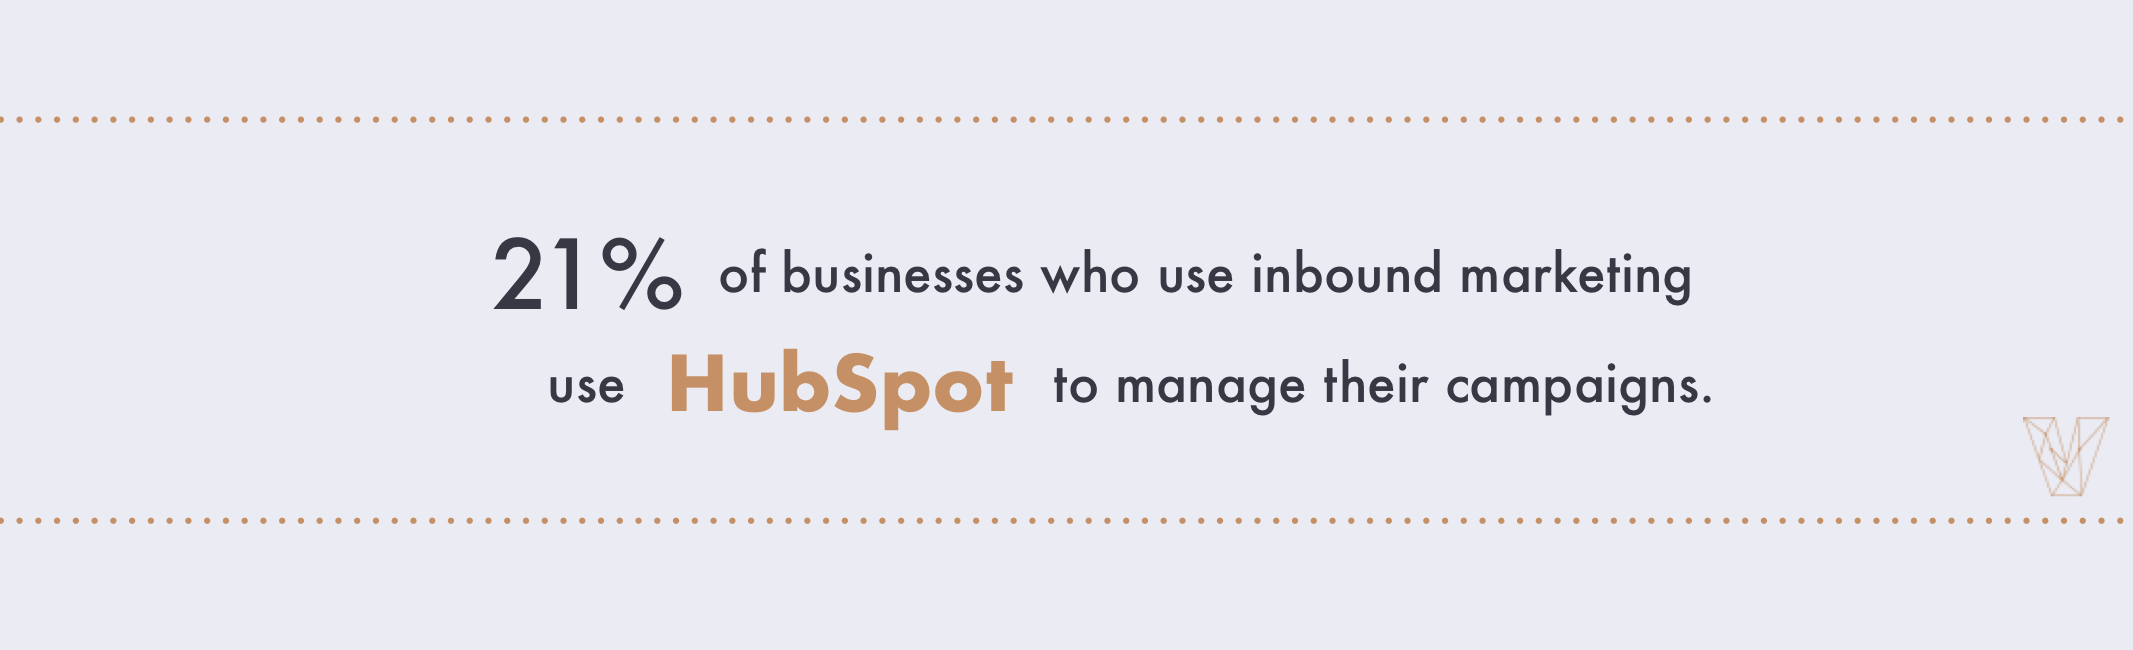 21% of businesses who use inbound marketing use hubspot to manage their campaigns